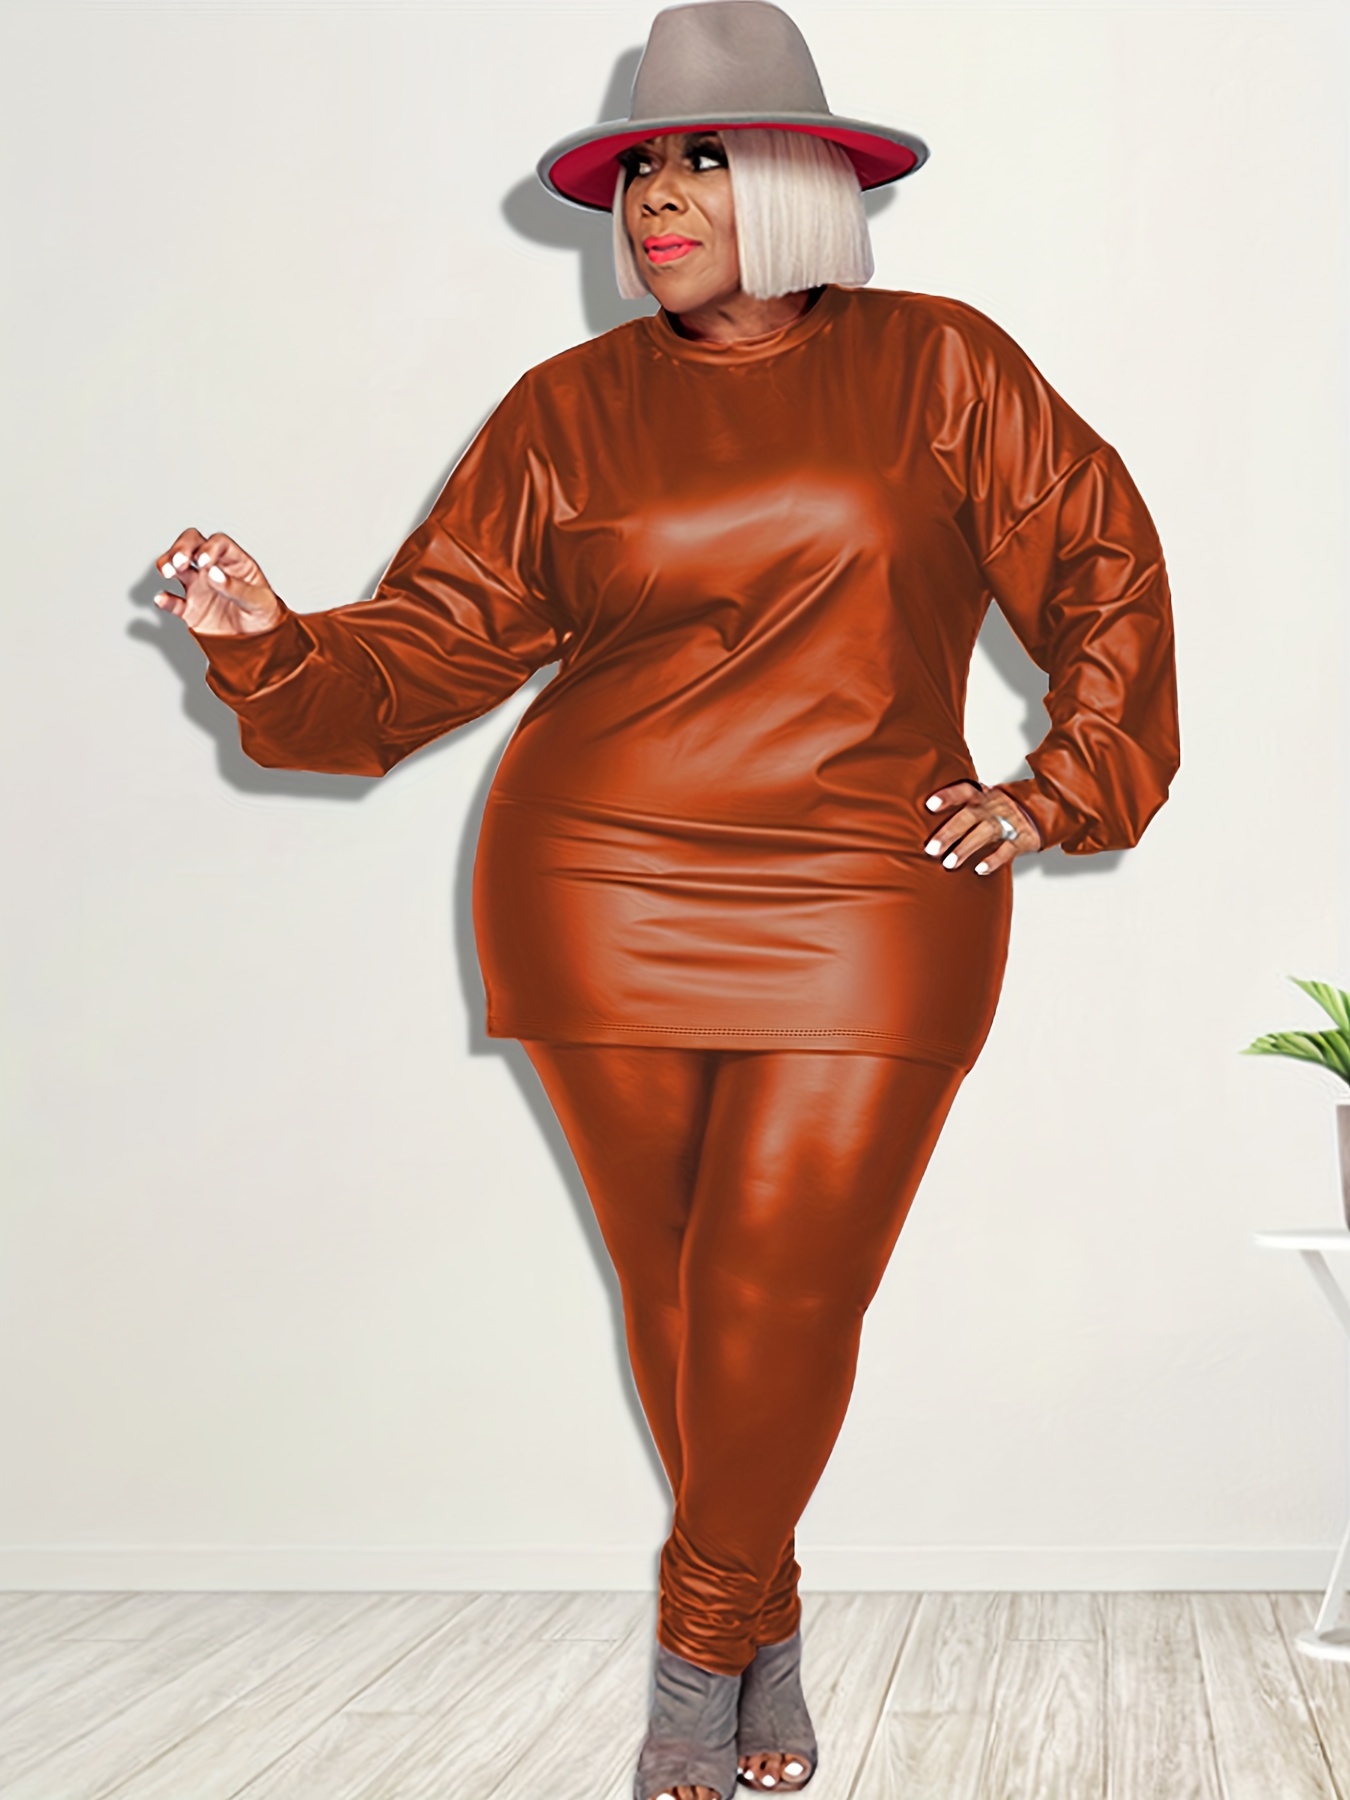 Women's Plus Size Clothing - The Leather House